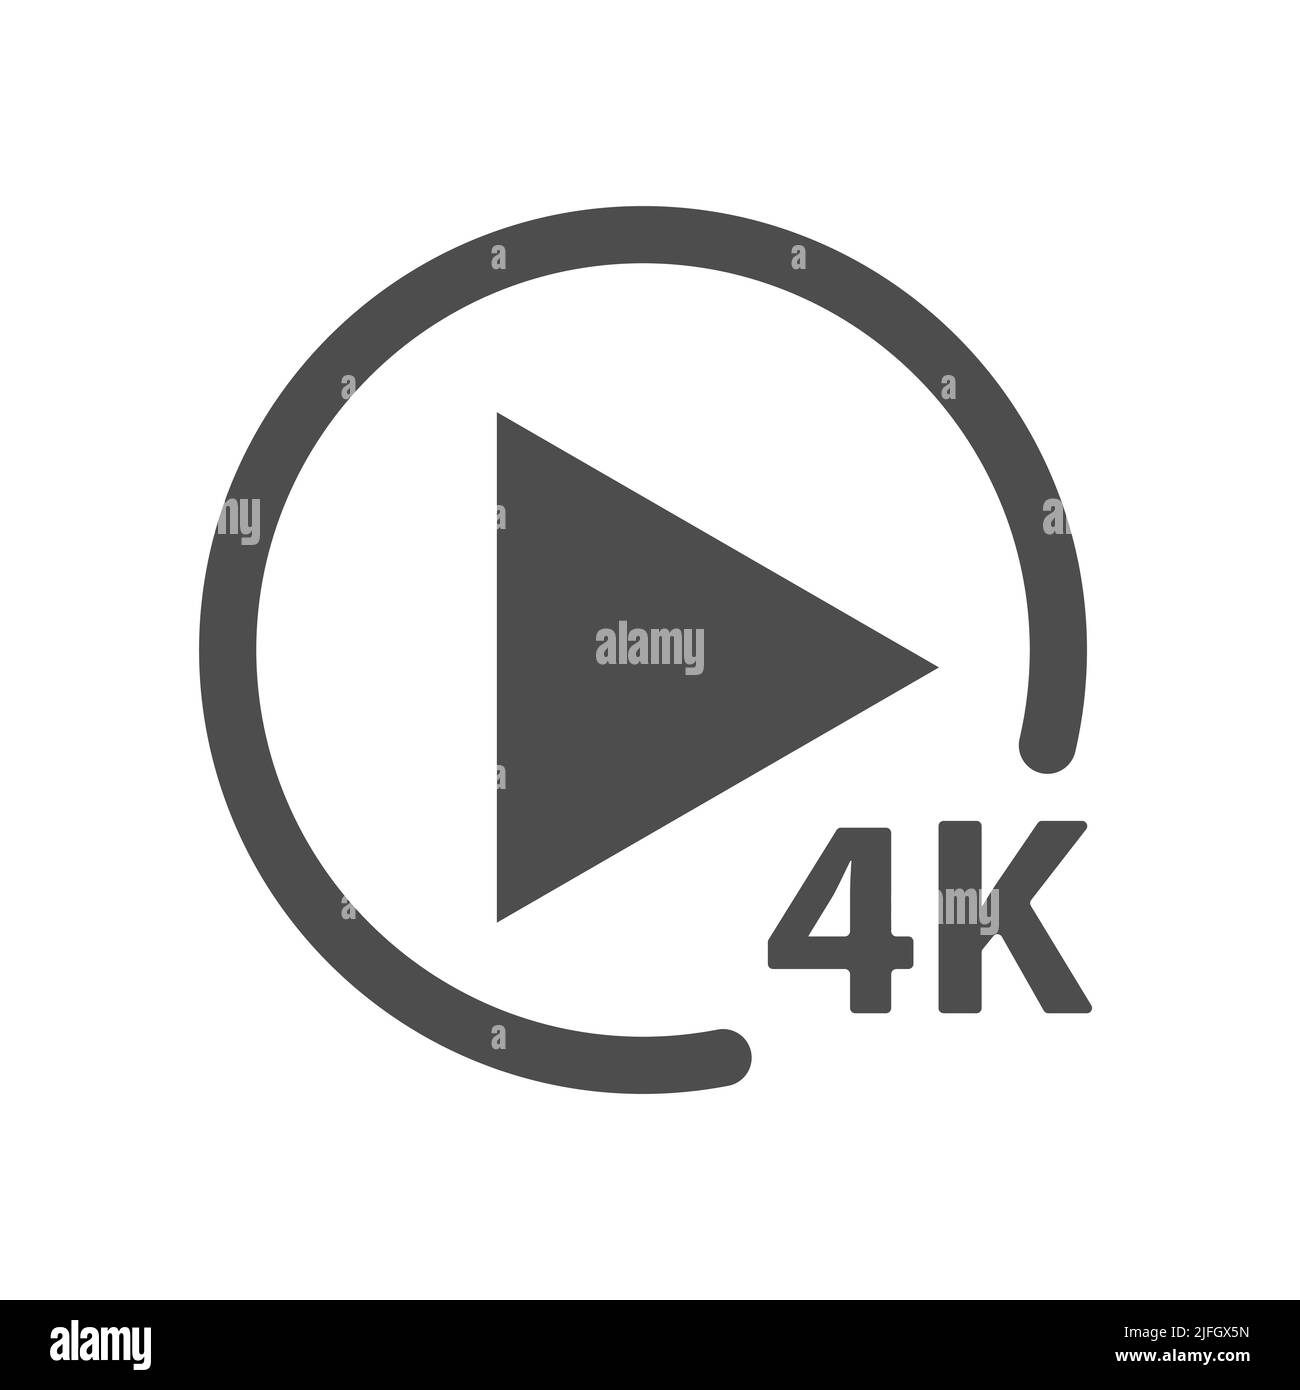 icon of the 4K player. Illustration for website, application and creative design. Flat style Stock Vector